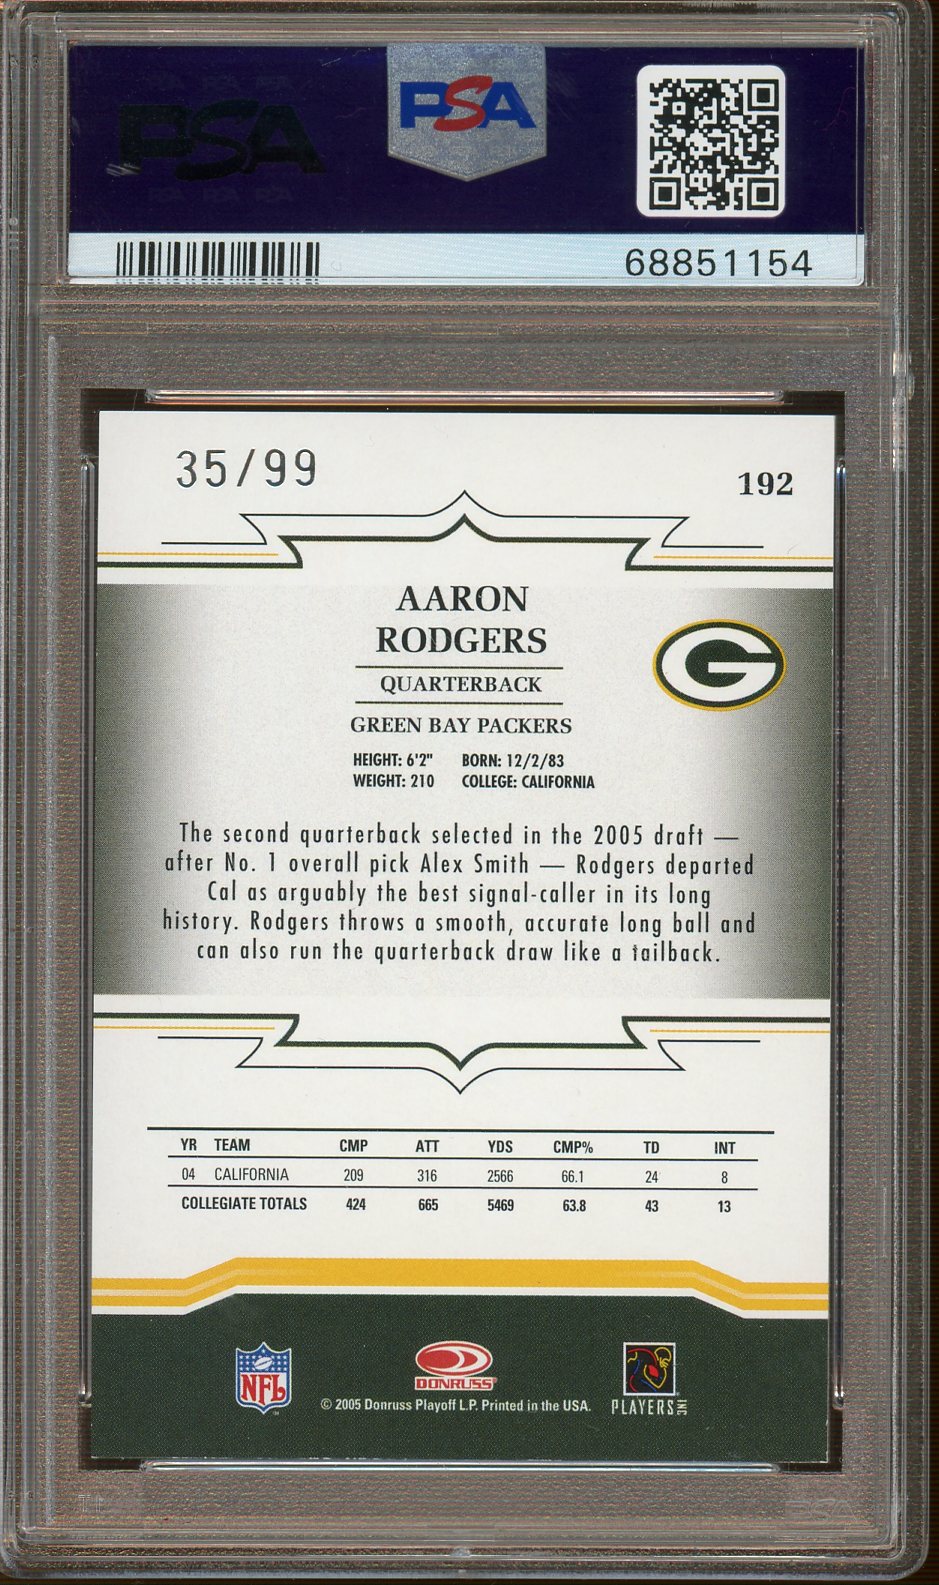 PSA - Mint 9 - 2005 Donruss - Aaron Rodgers - Throwback Threads -  Silver - 35/99